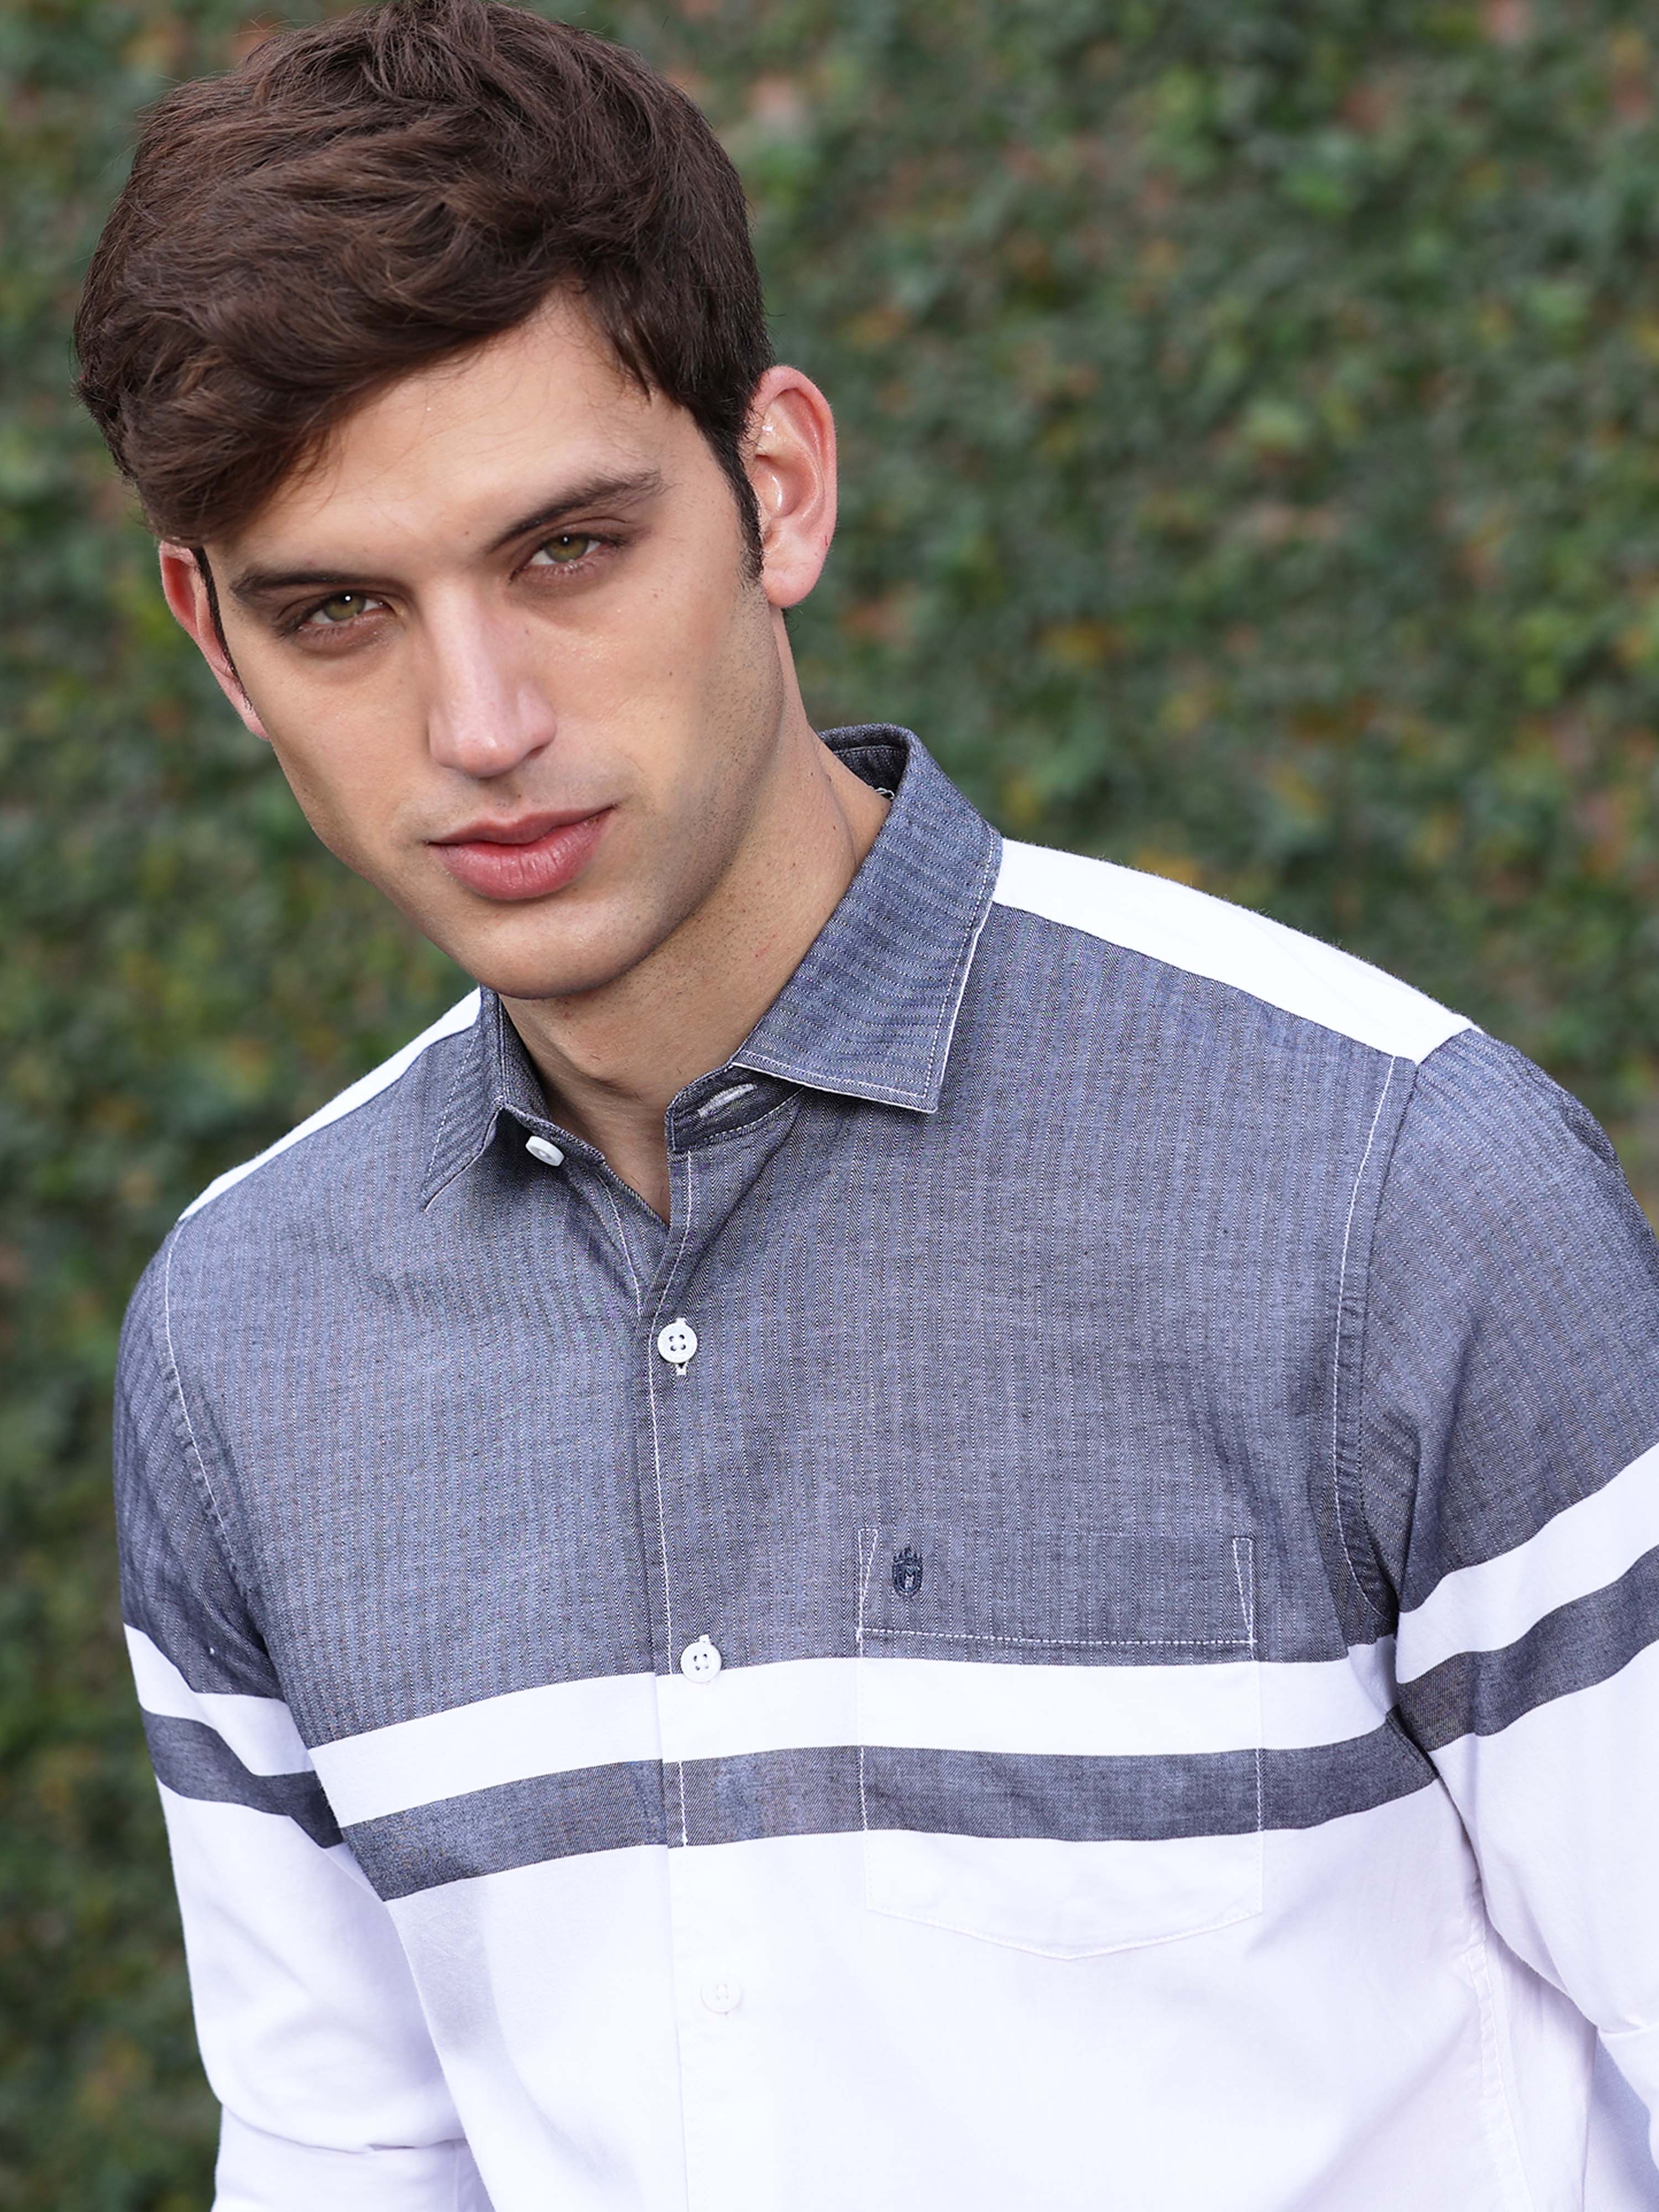 Buy White And Ash Striped Shirt Mens Full SleeveRs. 899.00